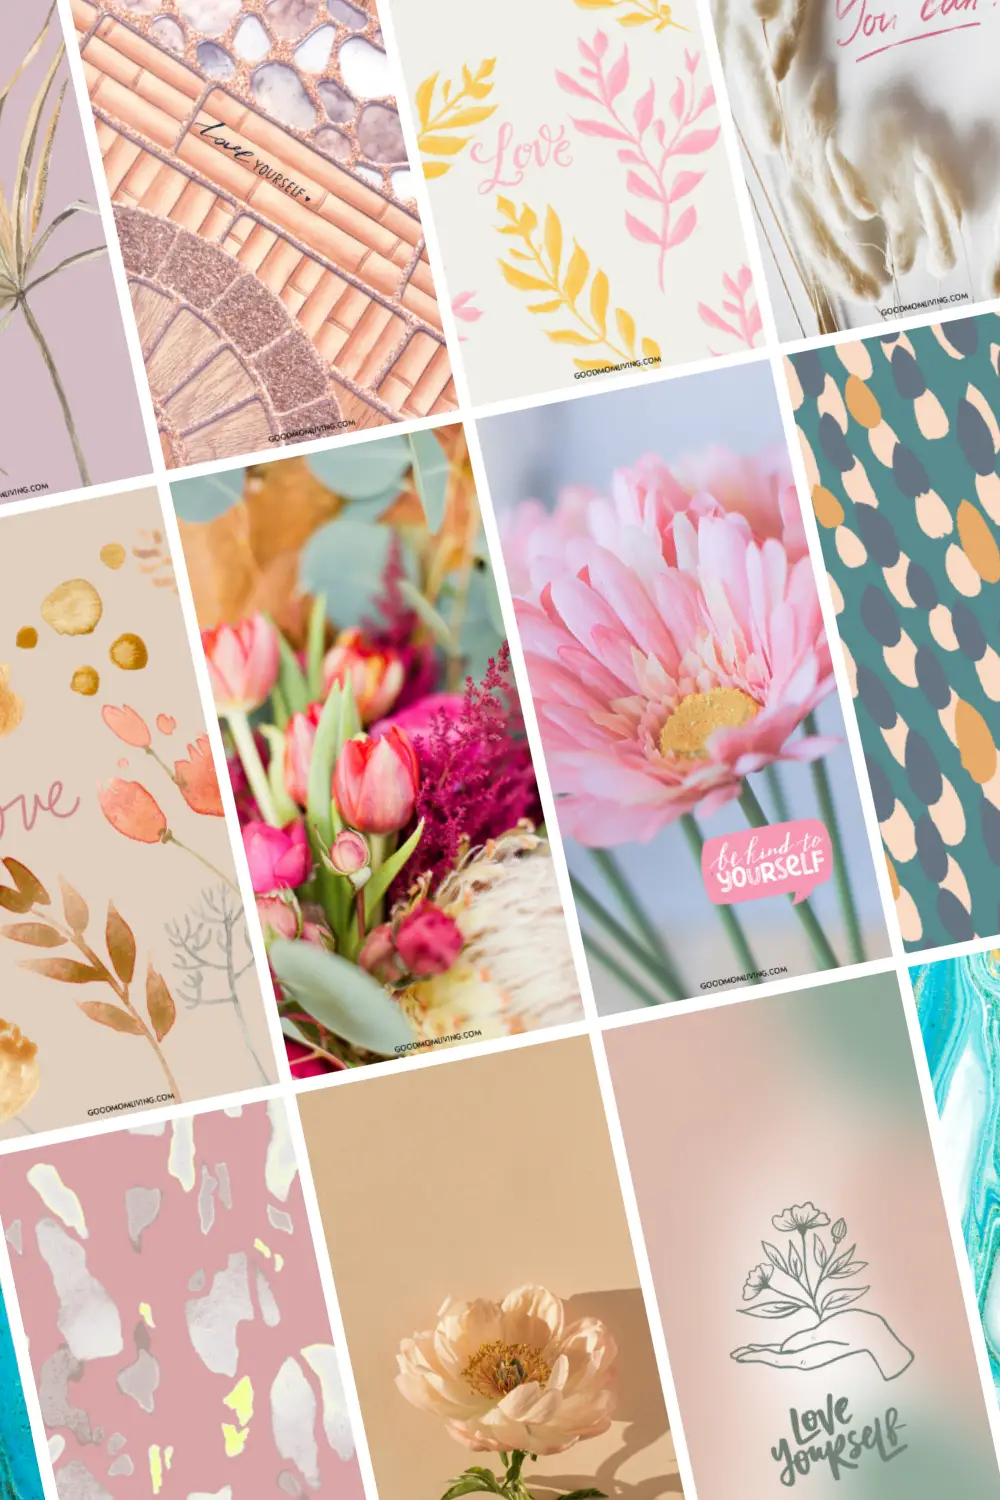 A collage of pink and gold designs including flowers, motivational quotes and abstract patterns. - Cute iPhone, paper